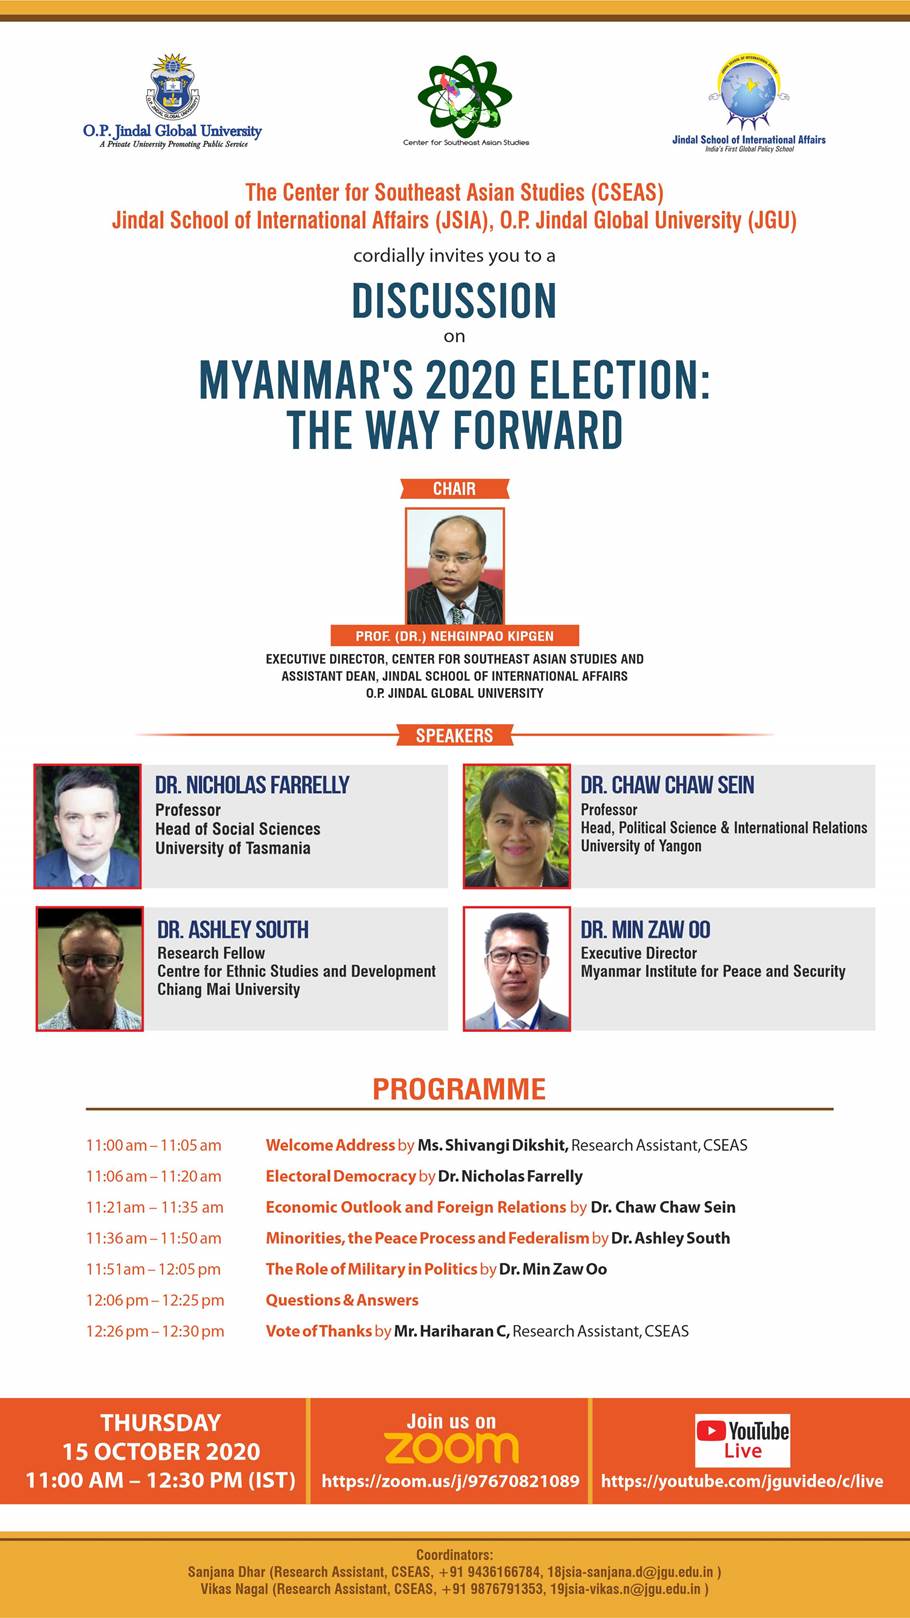  Discussion : Myanmar's 2020 Election: The Way Forward 